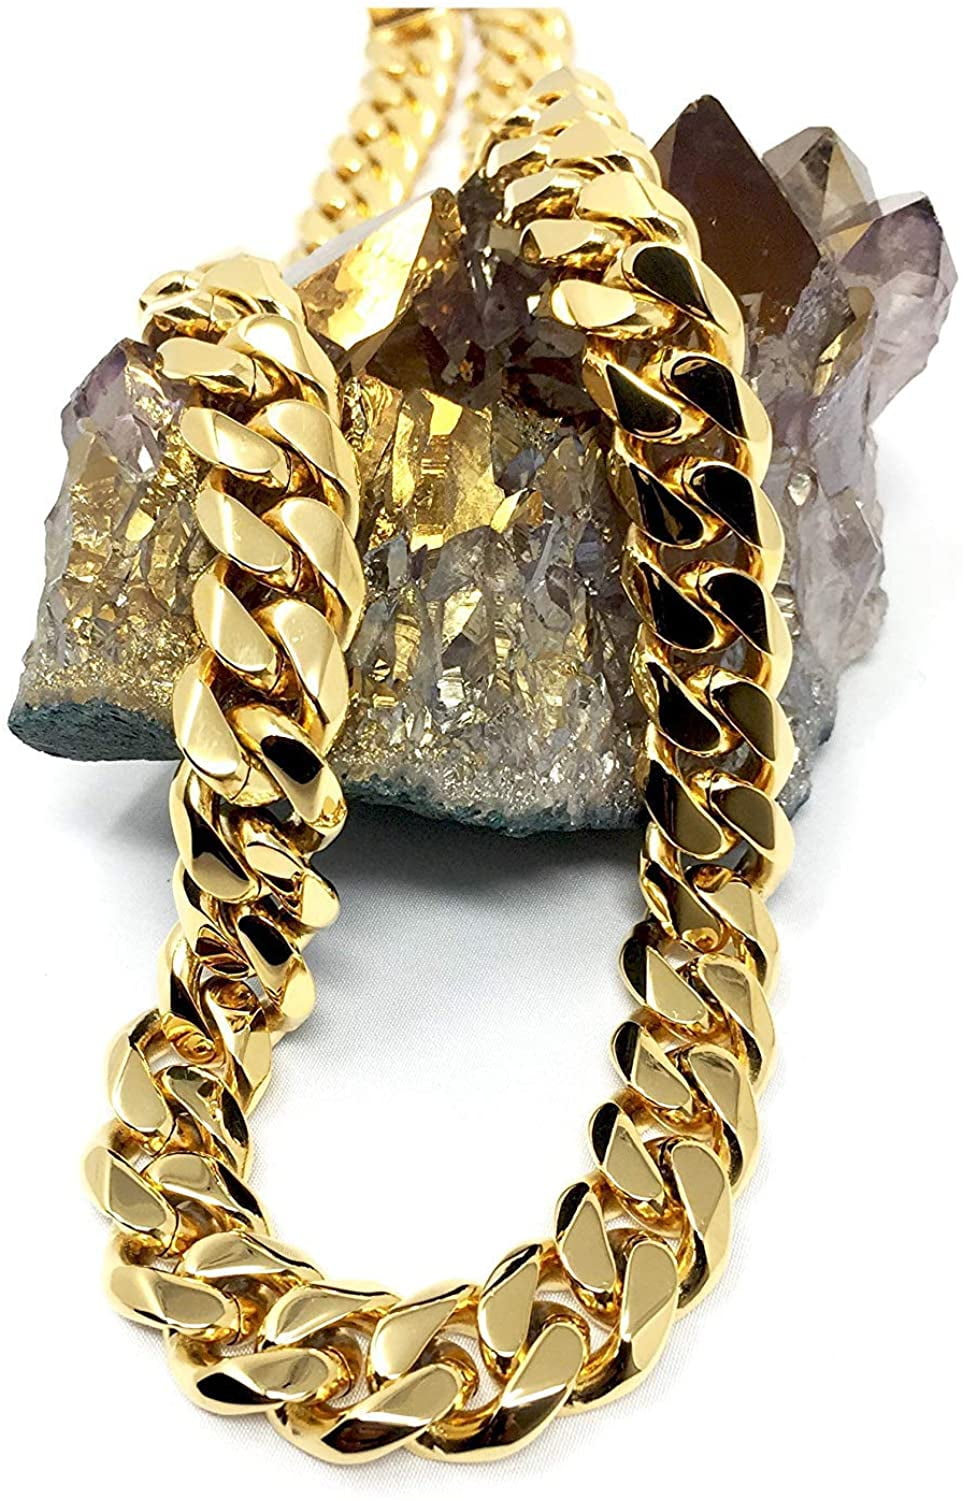 Gold Cuban Link Chain Necklace for Men Real 14MM 24K Karat Diamond Cut Heavy w Solid Thick Clasp US Made